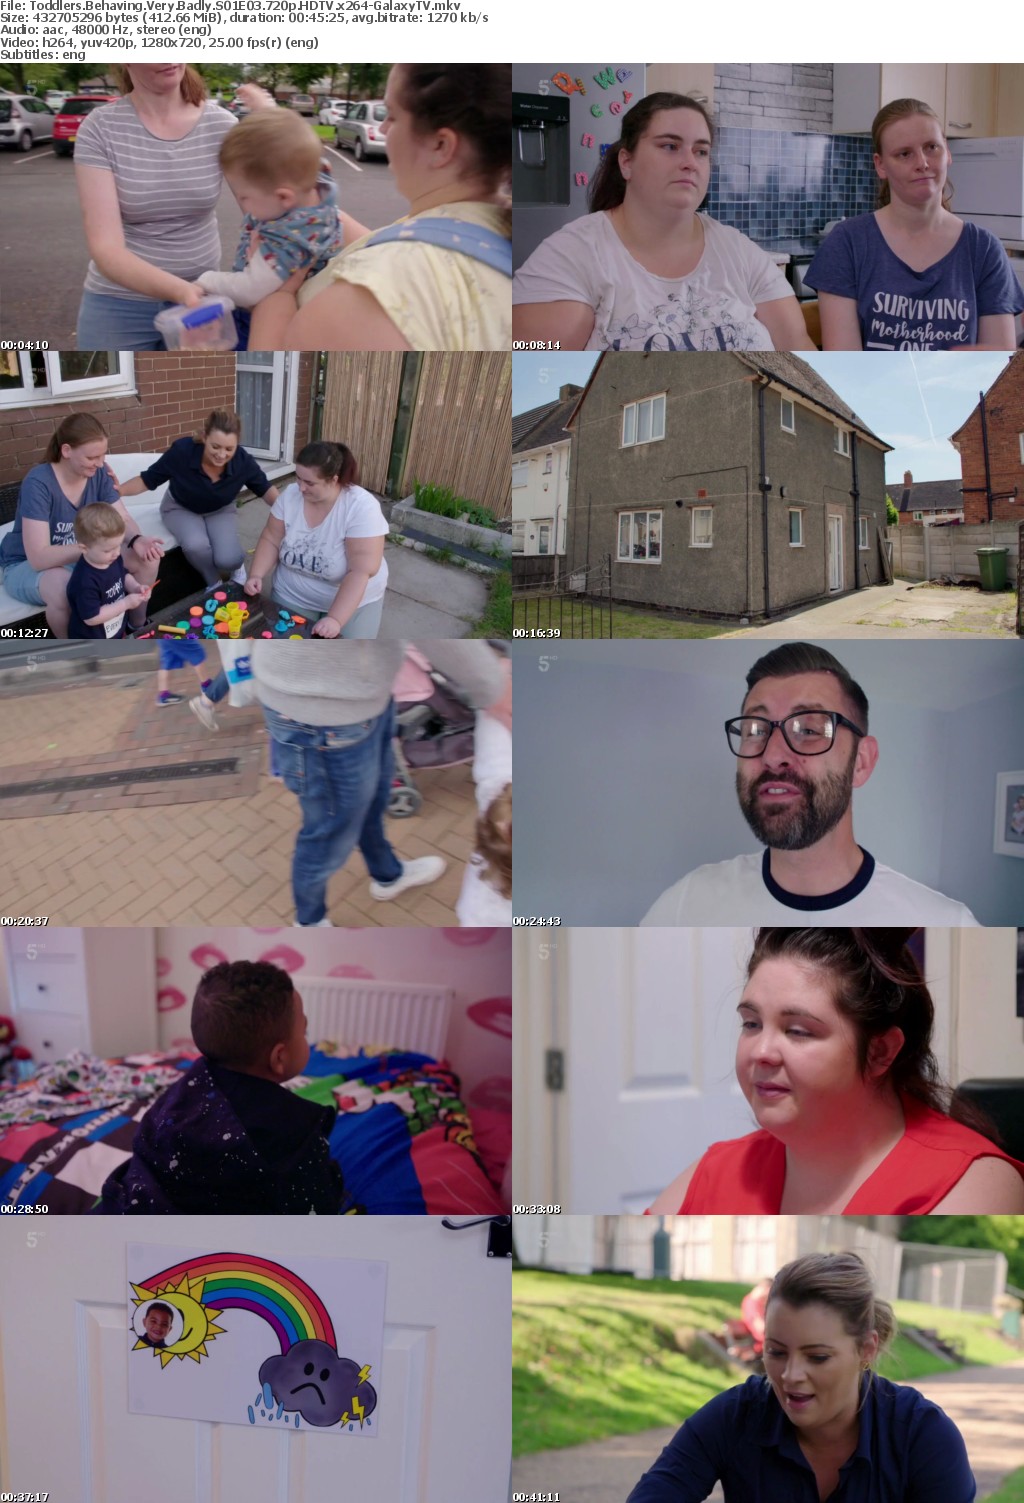 Toddlers Behaving Very Badly S01 COMPLETE 720p HDTV x264-GalaxyTV